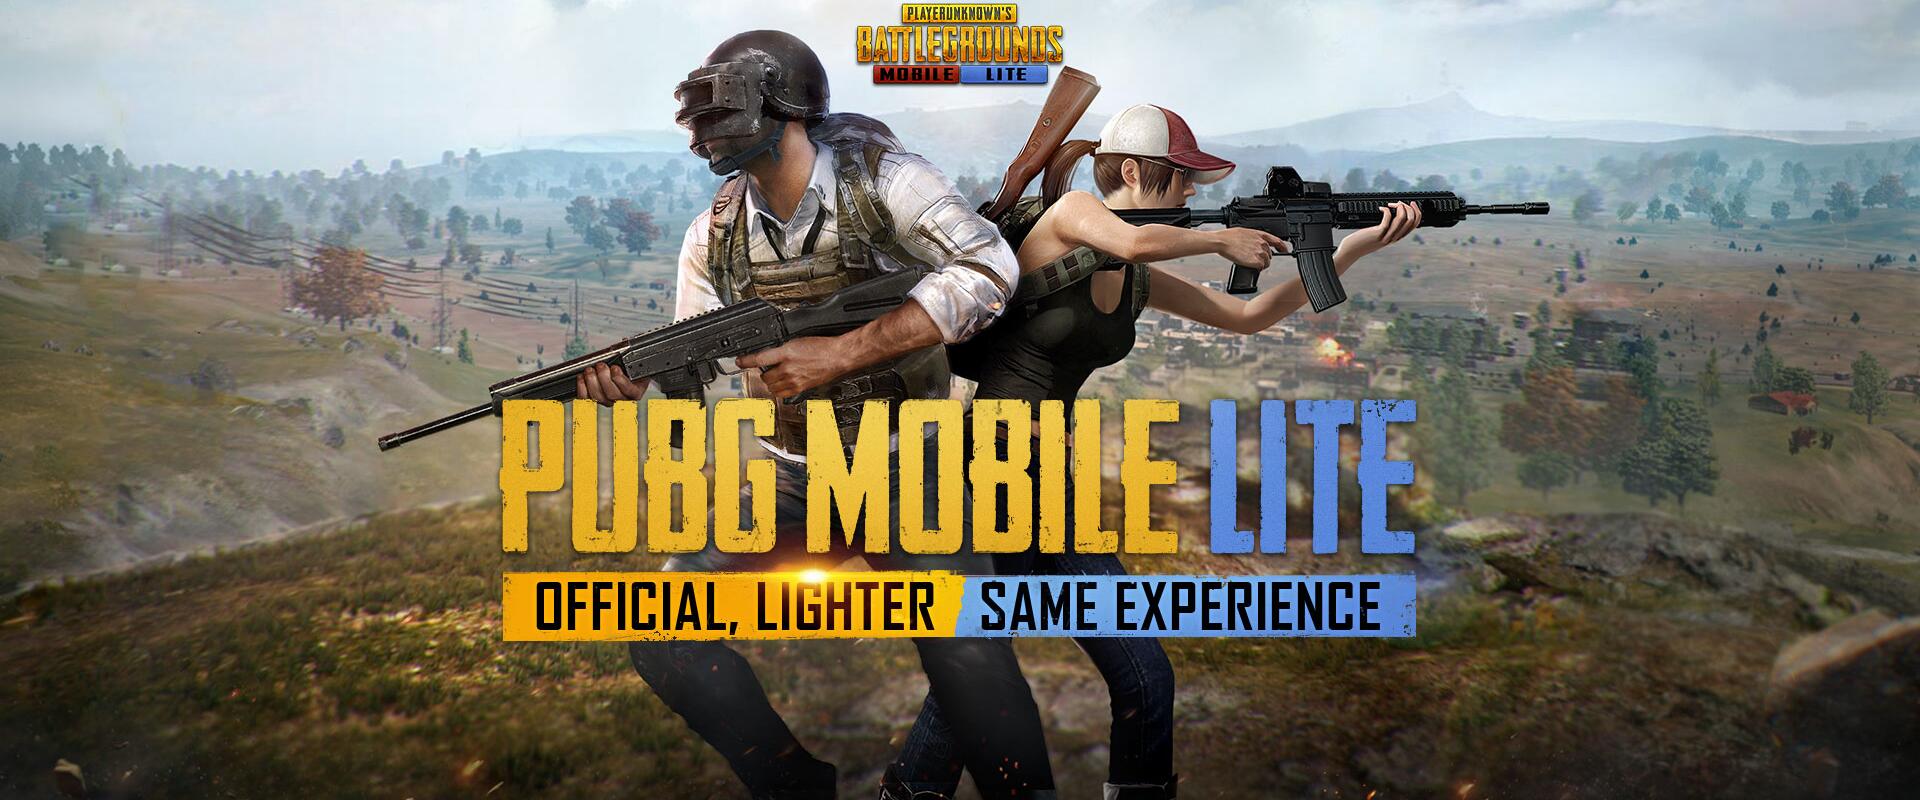 How to Update the Latest 2020 PUBG Mobile Lite